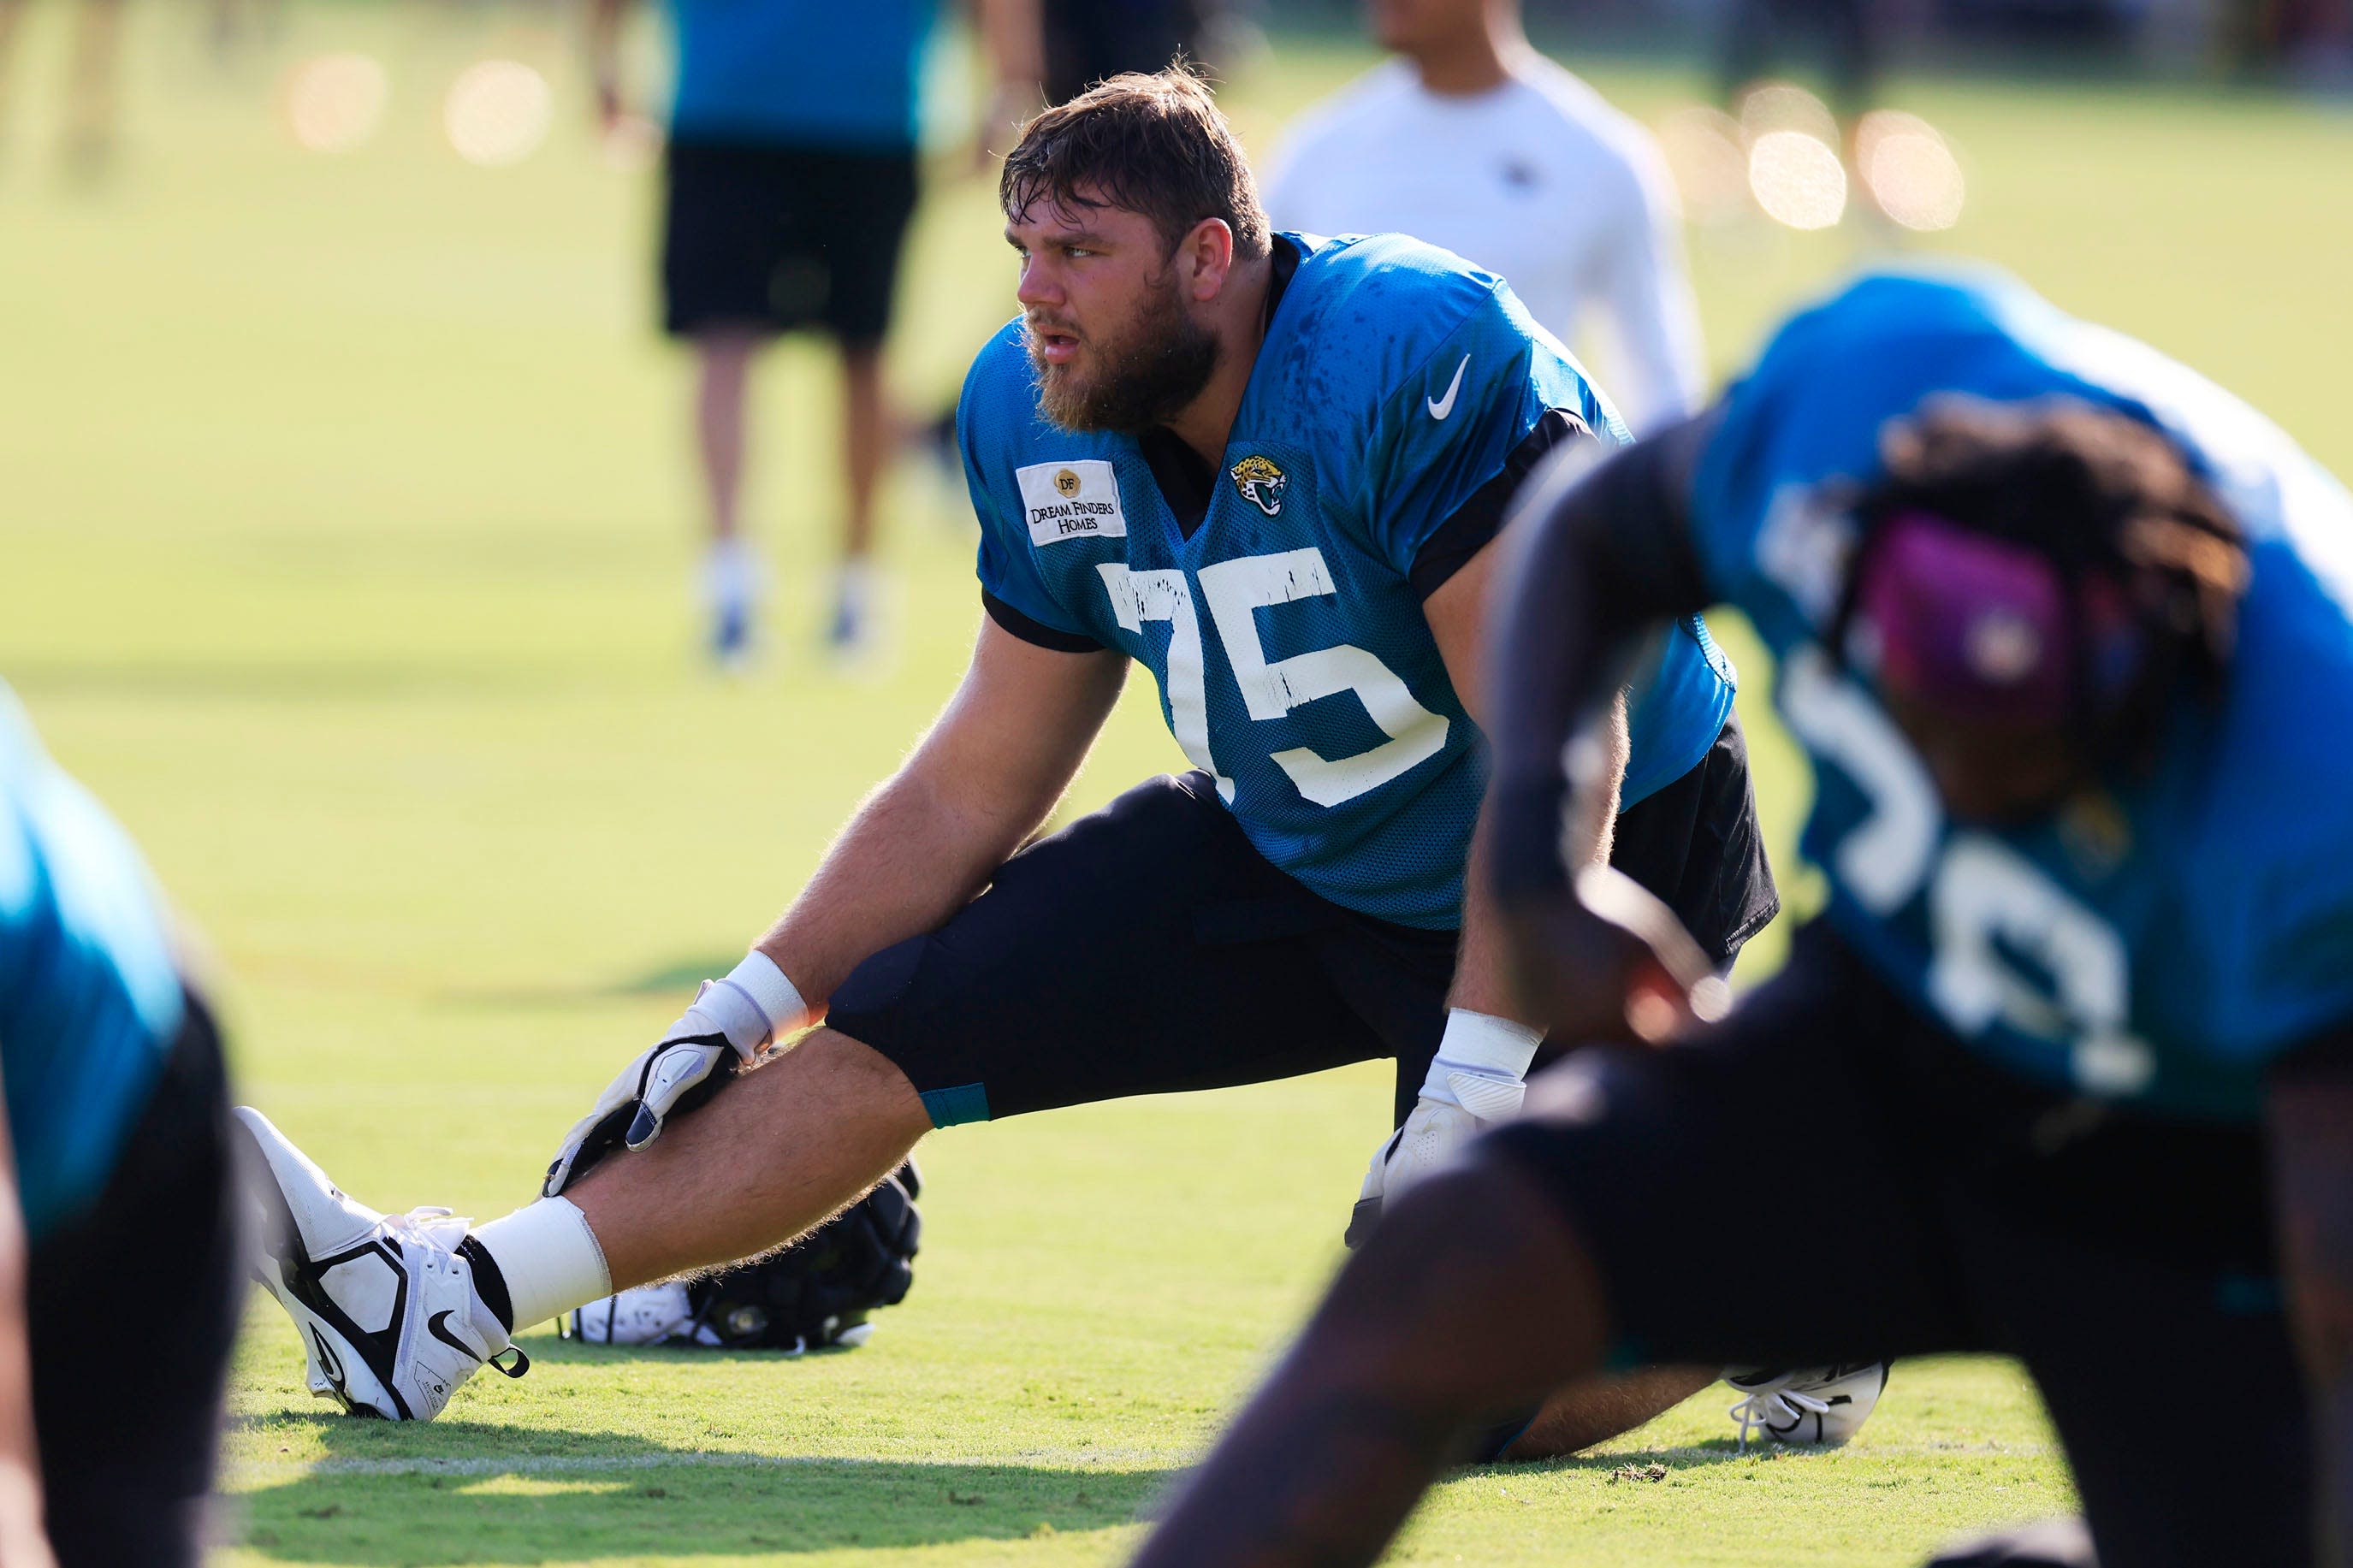 Who was the happiest Jaguar on the field for the first OTA? Likely, it was Cooper Hodges